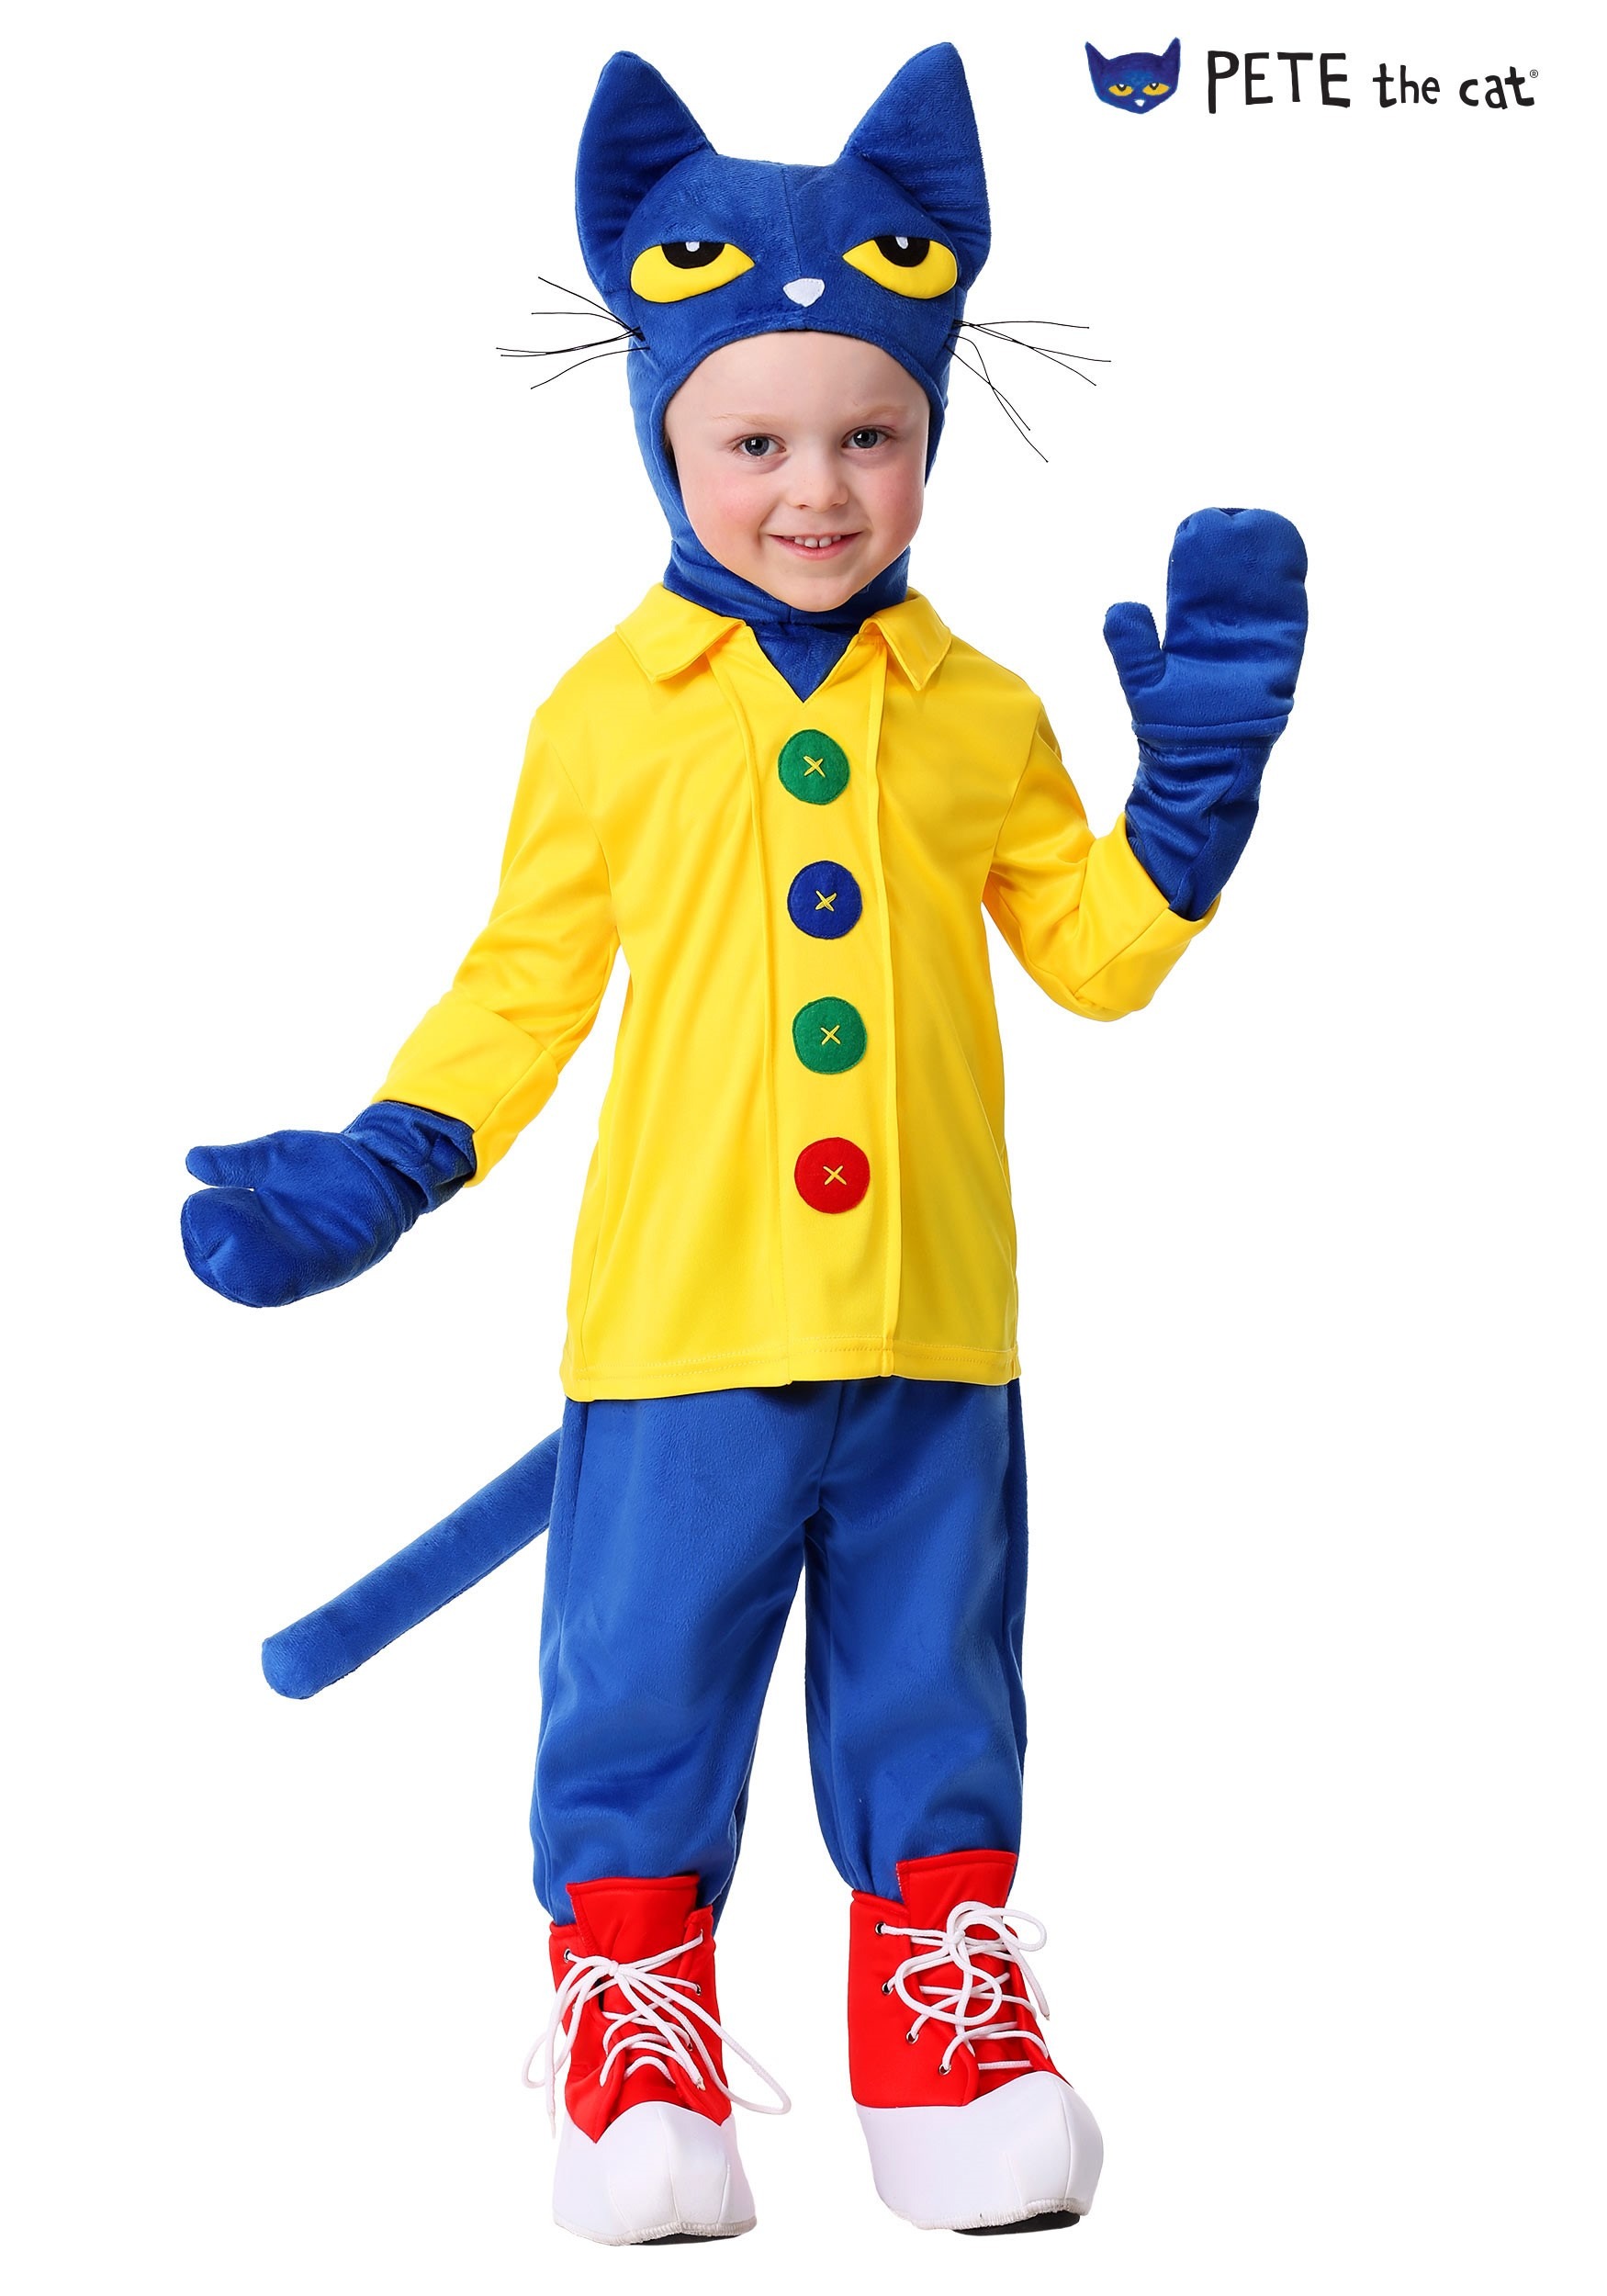 Toddler’s Pete the Cat Costume